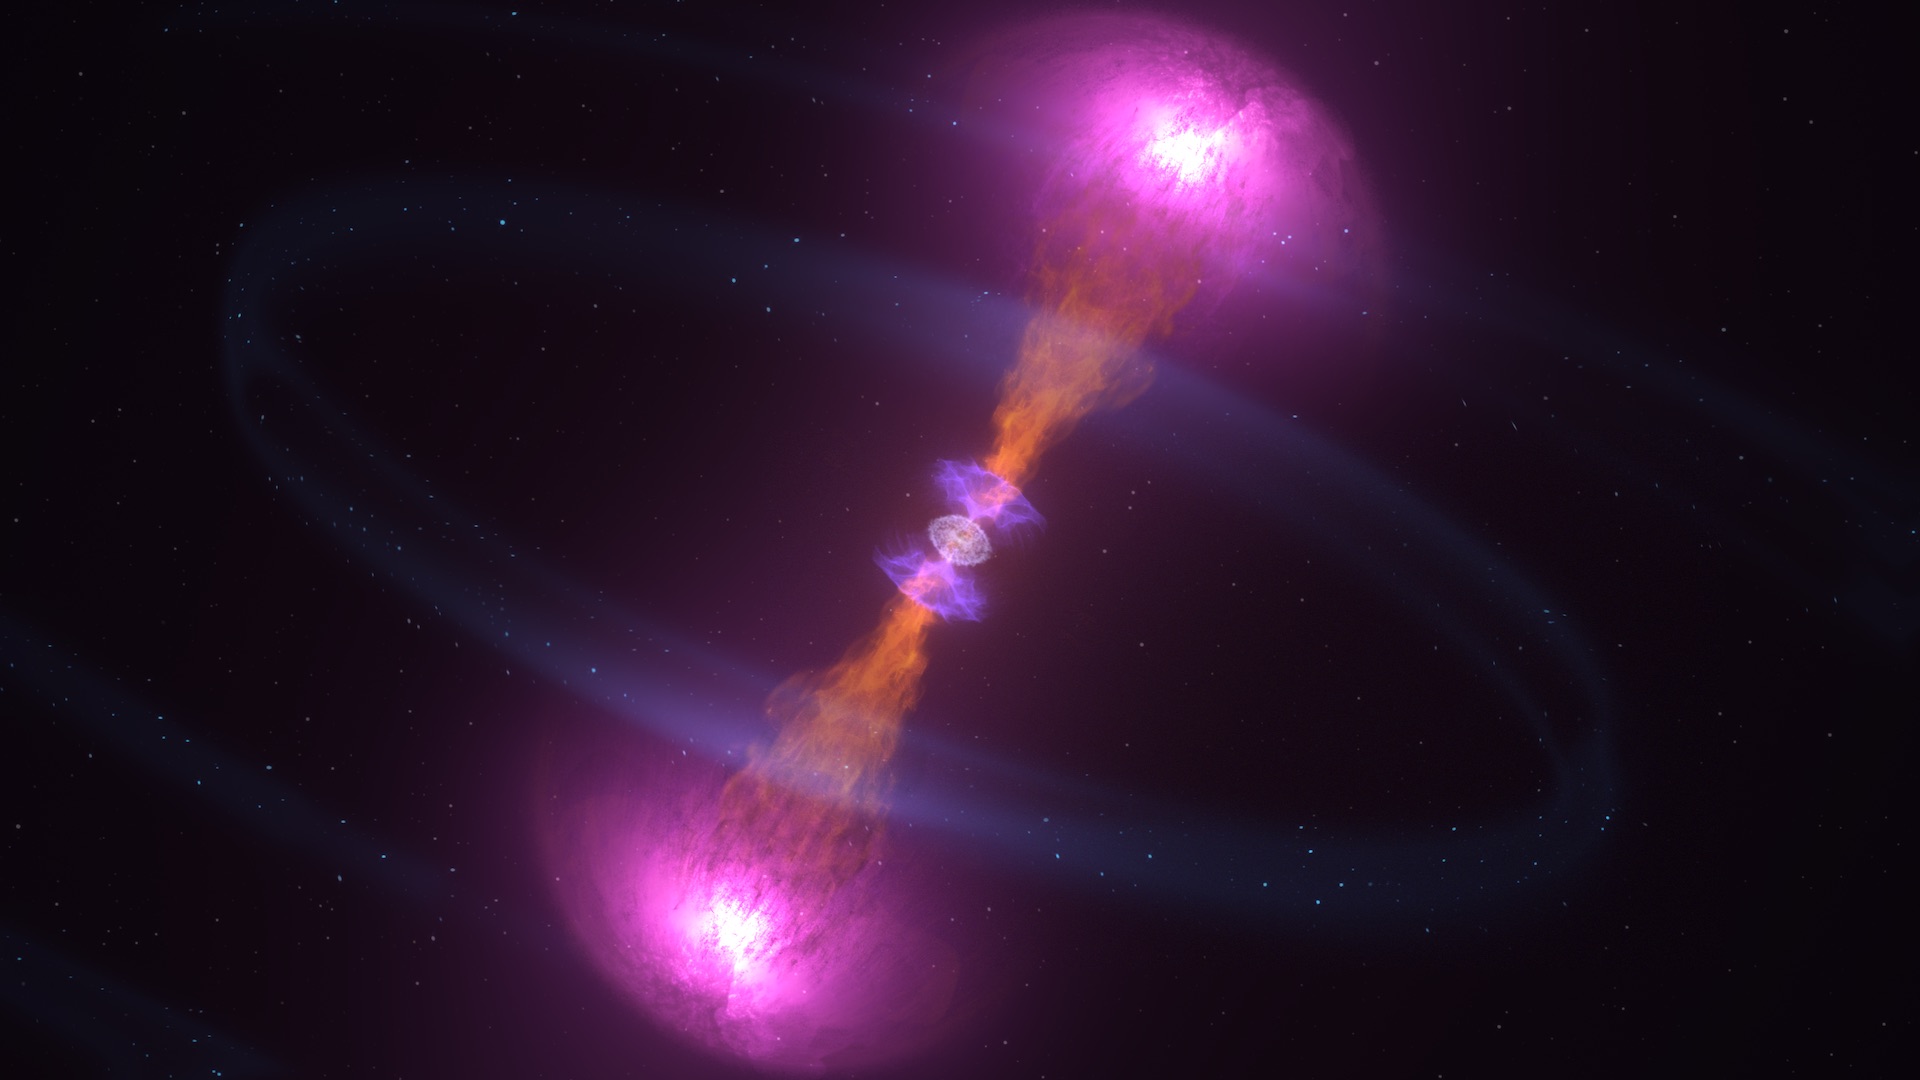 This animation captures phenomena observed over the course of nine days following the neutron star merger known as GW170817, detected on Aug. 17, 2017. They include gravitational waves (pale arcs), a near-light-speed jet that produced gamma rays (magenta), expanding debris from a kilonova that produced ultraviolet (violet), optical and infrared (blue-white to red) emission, and, once the jet directed toward us expanded into our view from Earth, X-rays (blue). Credit: NASA's Goddard Space Flight Center/CI LabMusic: "Exploding Skies" from Killer TracksWatch this video on the NASA Goddard YouTube channel.Complete transcript available.